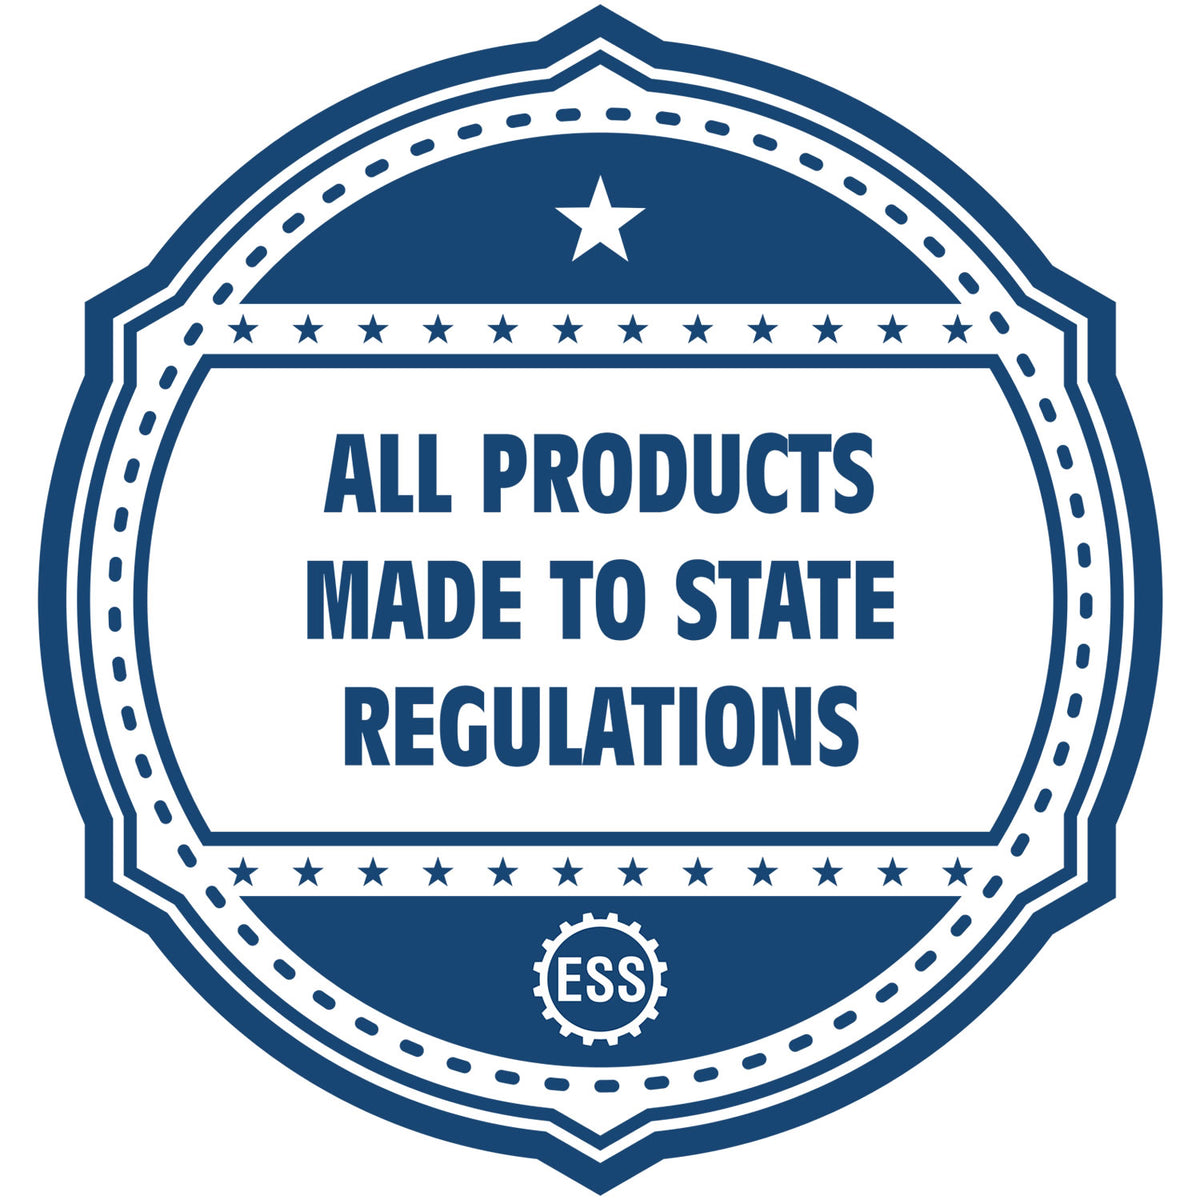 An icon or badge element for the Slim Pre-Inked Kansas Architect Seal Stamp showing that this product is made in compliance with state regulations.